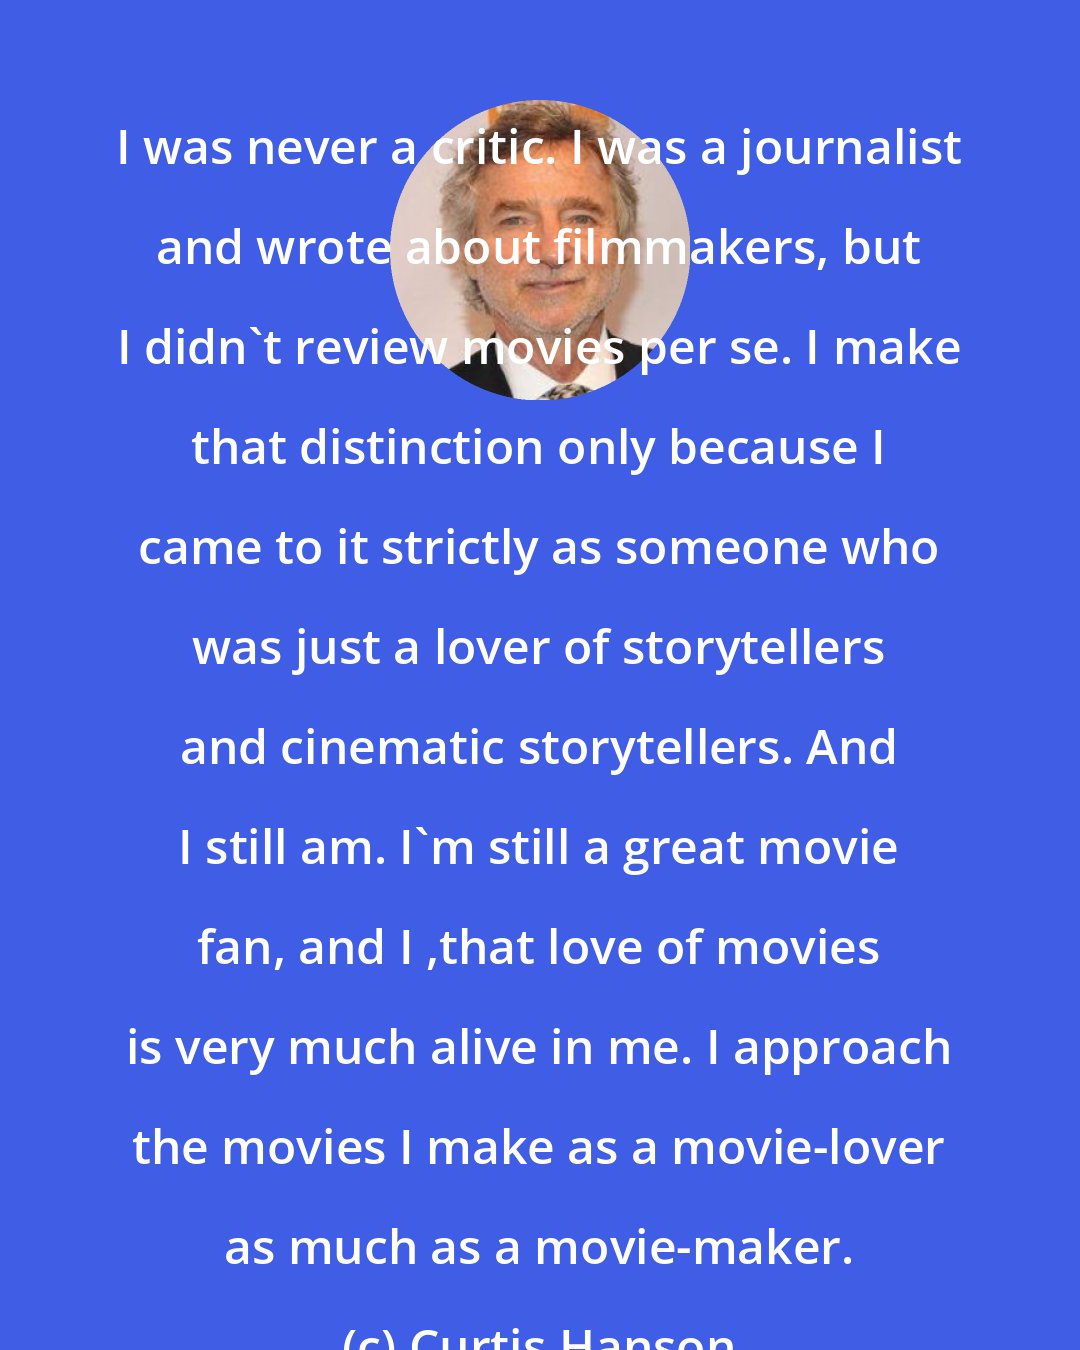 Curtis Hanson: I was never a critic. I was a journalist and wrote about filmmakers, but I didn't review movies per se. I make that distinction only because I came to it strictly as someone who was just a lover of storytellers and cinematic storytellers. And I still am. I'm still a great movie fan, and I ,that love of movies is very much alive in me. I approach the movies I make as a movie-lover as much as a movie-maker.